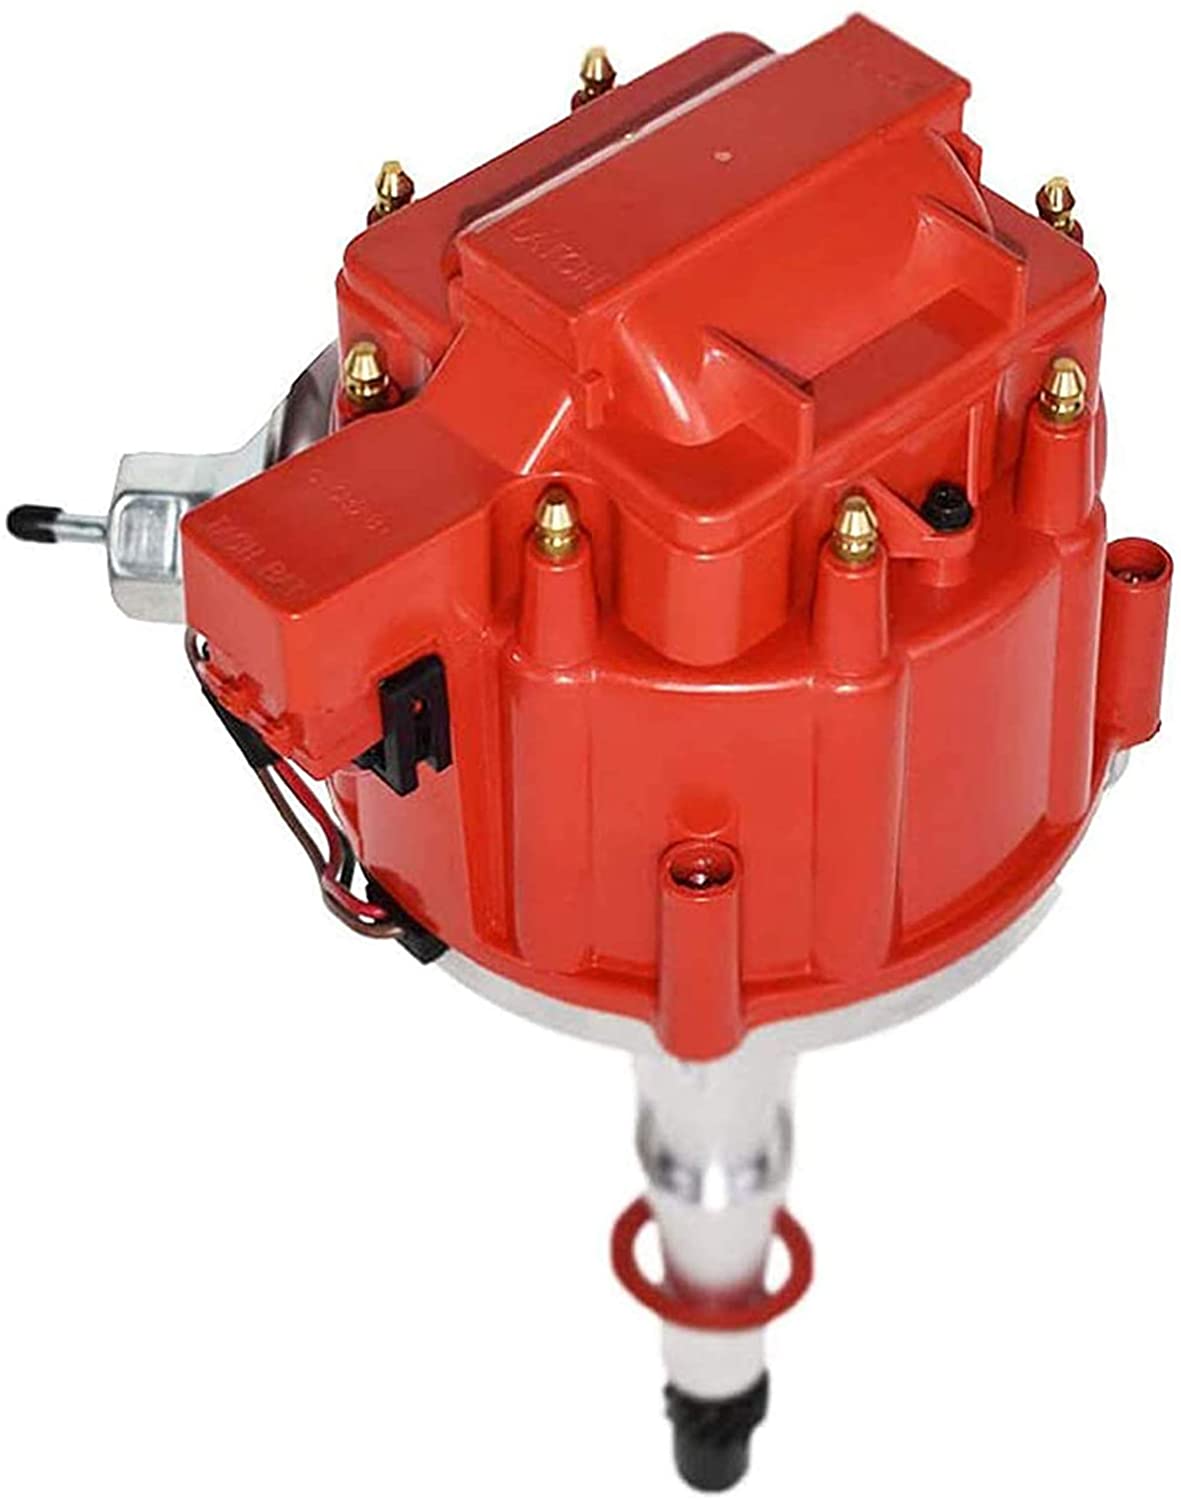 A-Team Performance HEI Complete Distributor 65,000-volt Coil Male Cap Compatible with AMC Jeep V8 290, 304, 343, 360 390 401 One Wire Installation, Red Cap (Red)